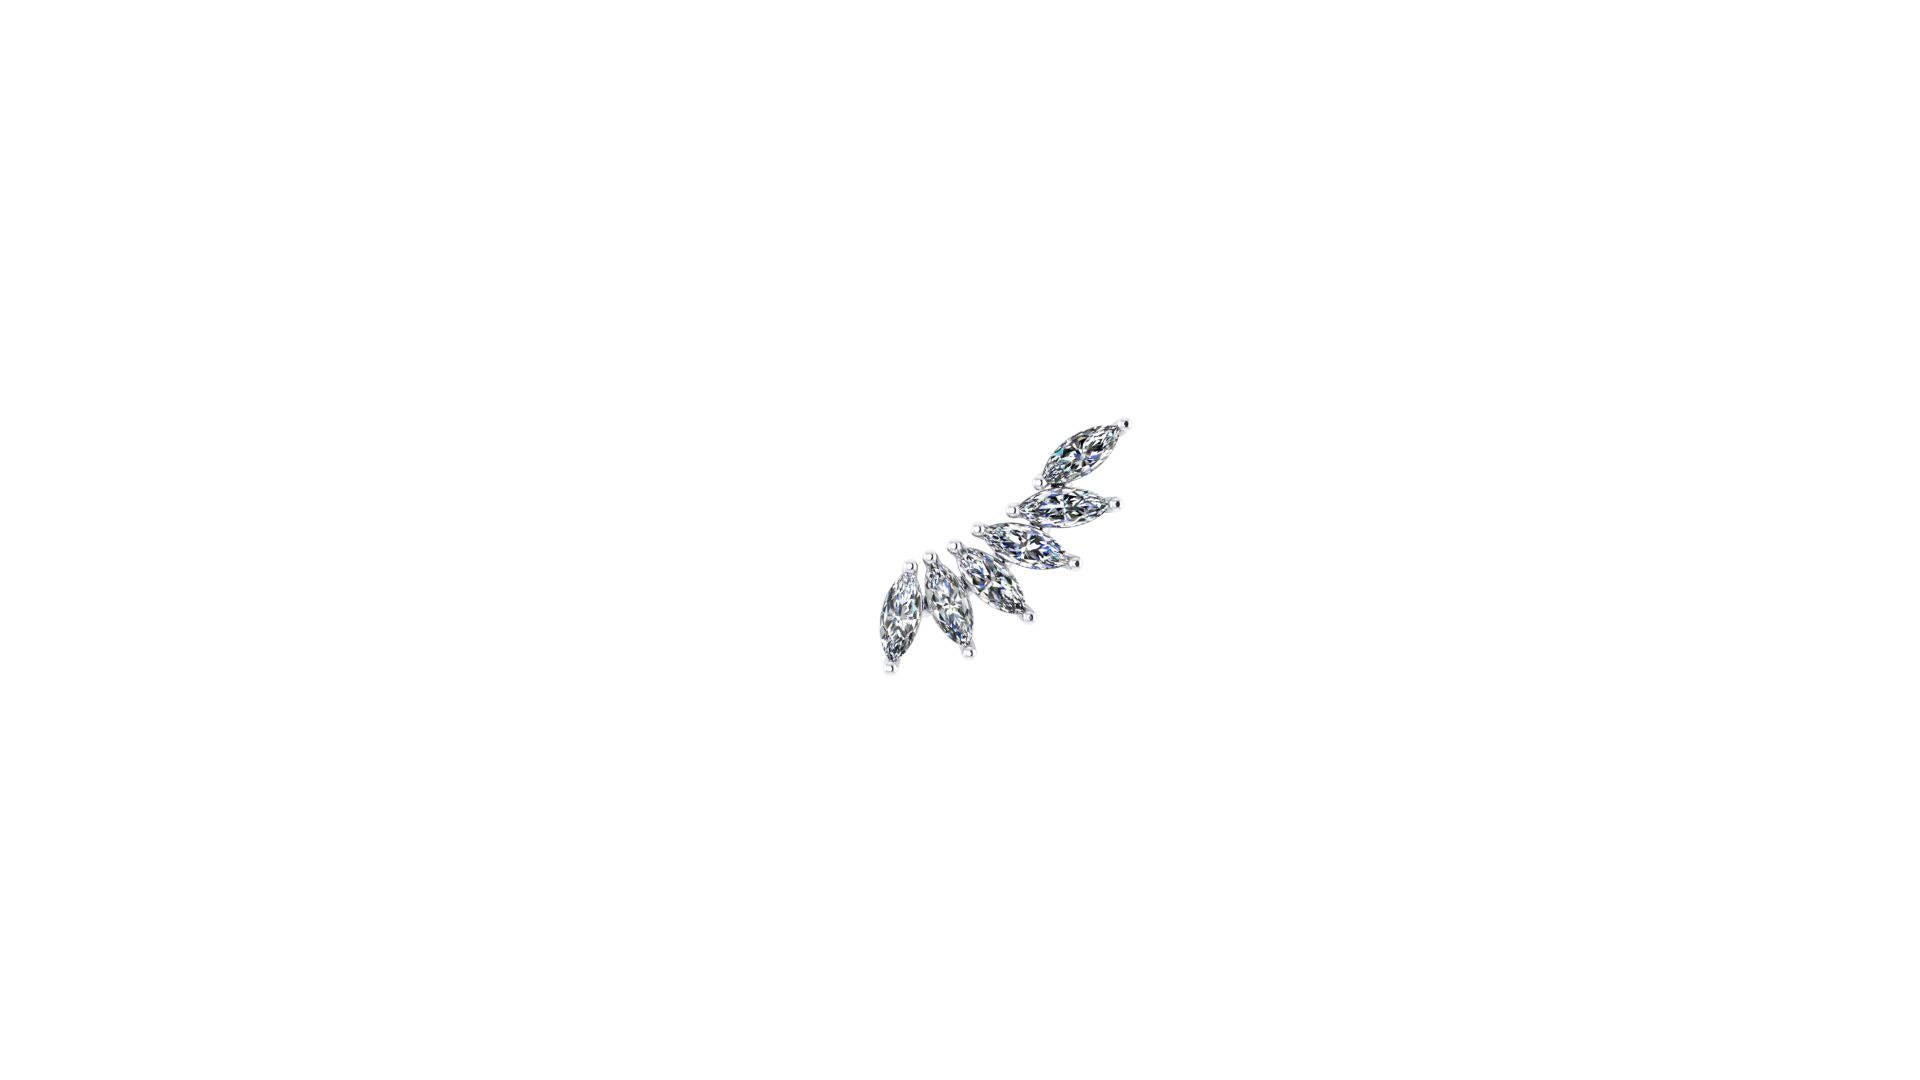 FERRUCCI 1.21 carats Marquise shape Diamonds wing earrings made in Platinum in New York City by Italian master jeweler, modern fashion look for every sophisticated woman of every age, pret-a-porter, easy to wear from office to evening out.

Bring